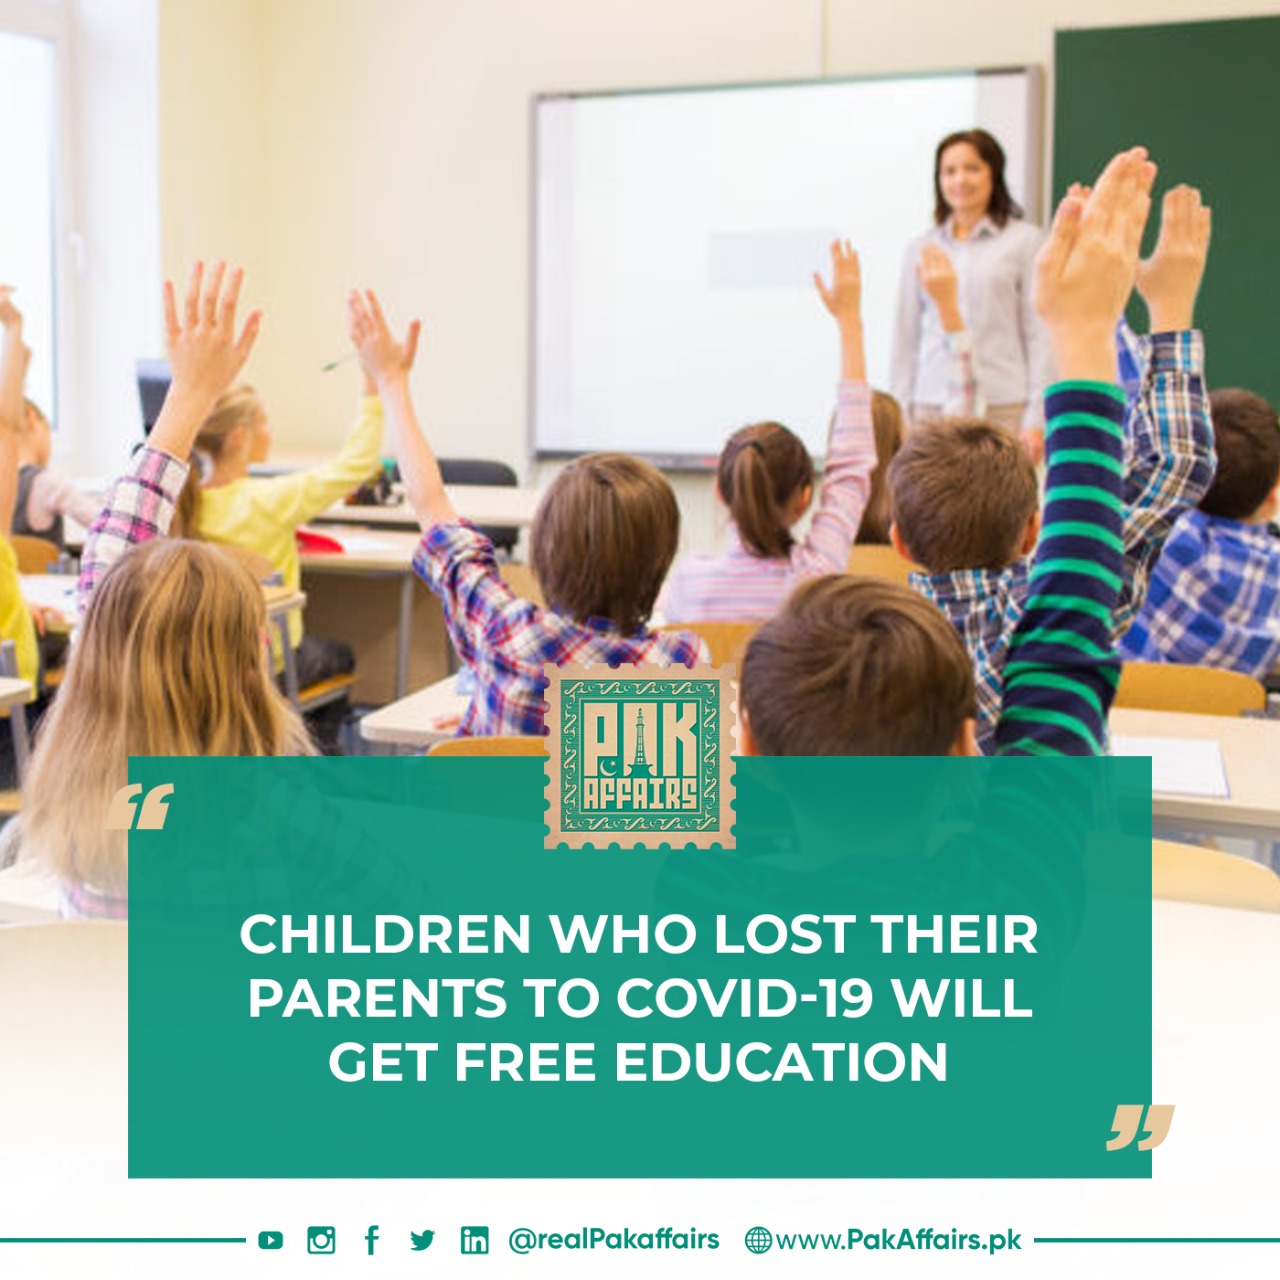 Children who lost their parents to Covid-19 will receive free education